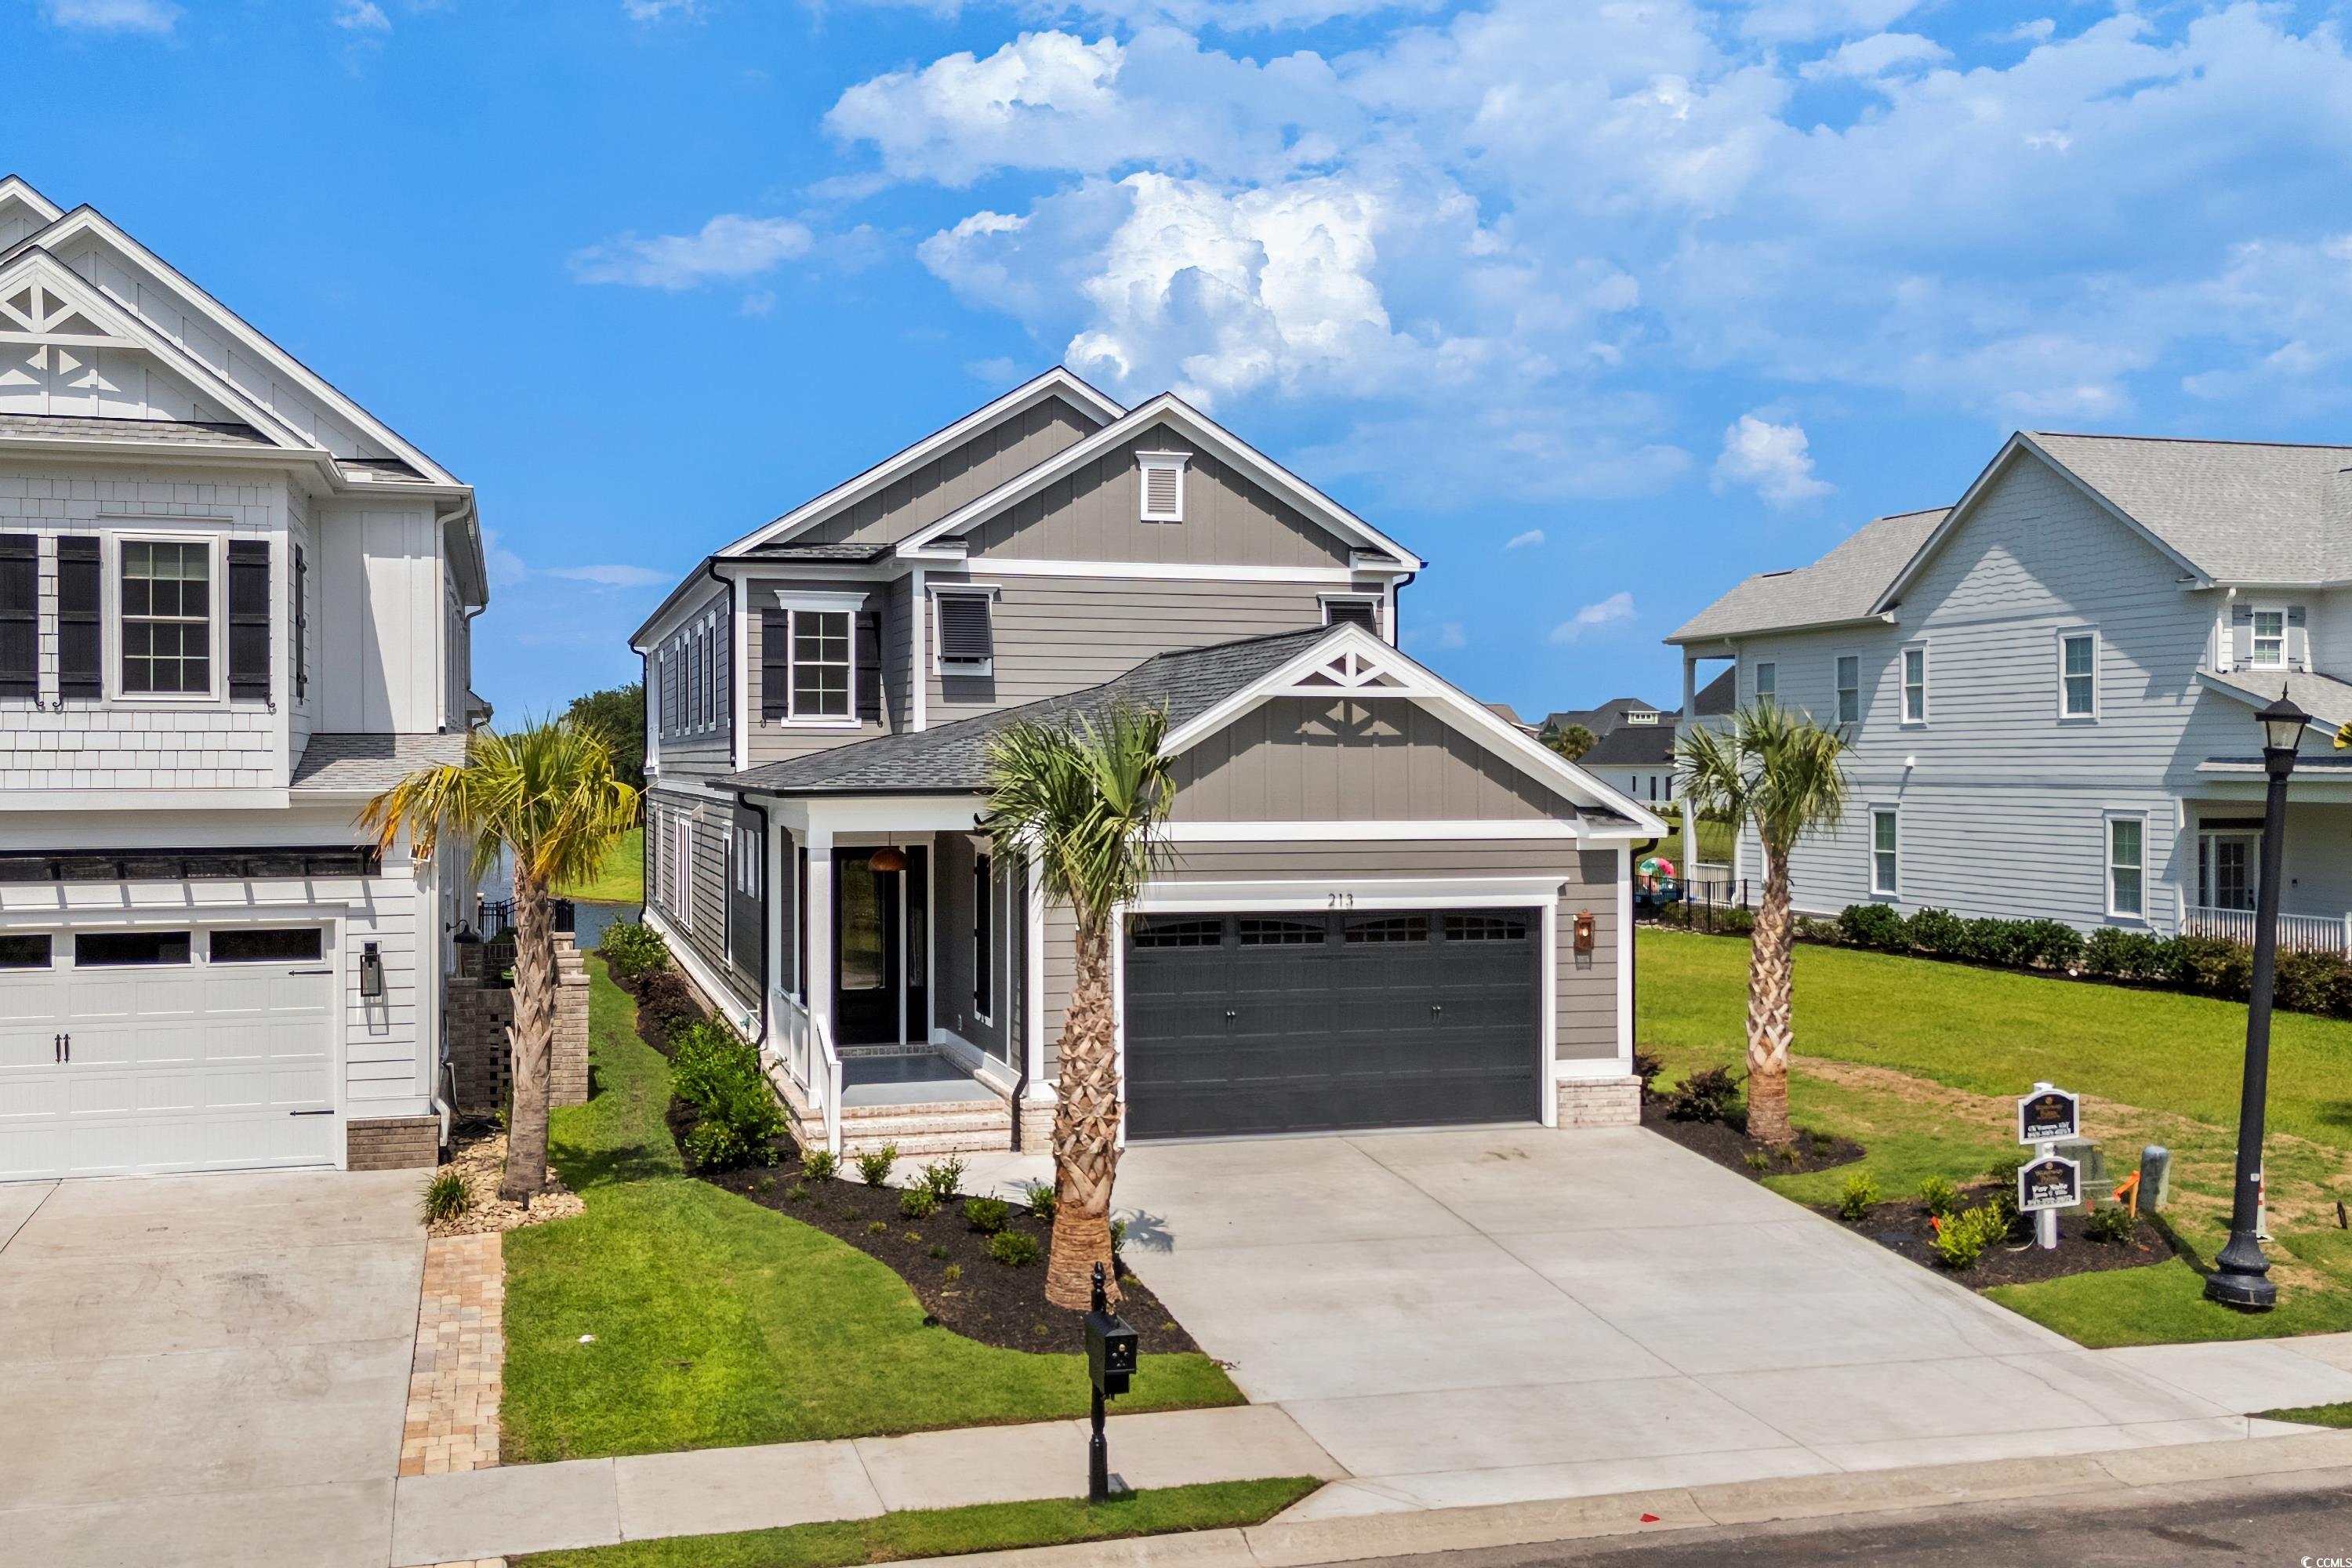 213 West Isle of Palms Ave. Myrtle Beach, SC 29579